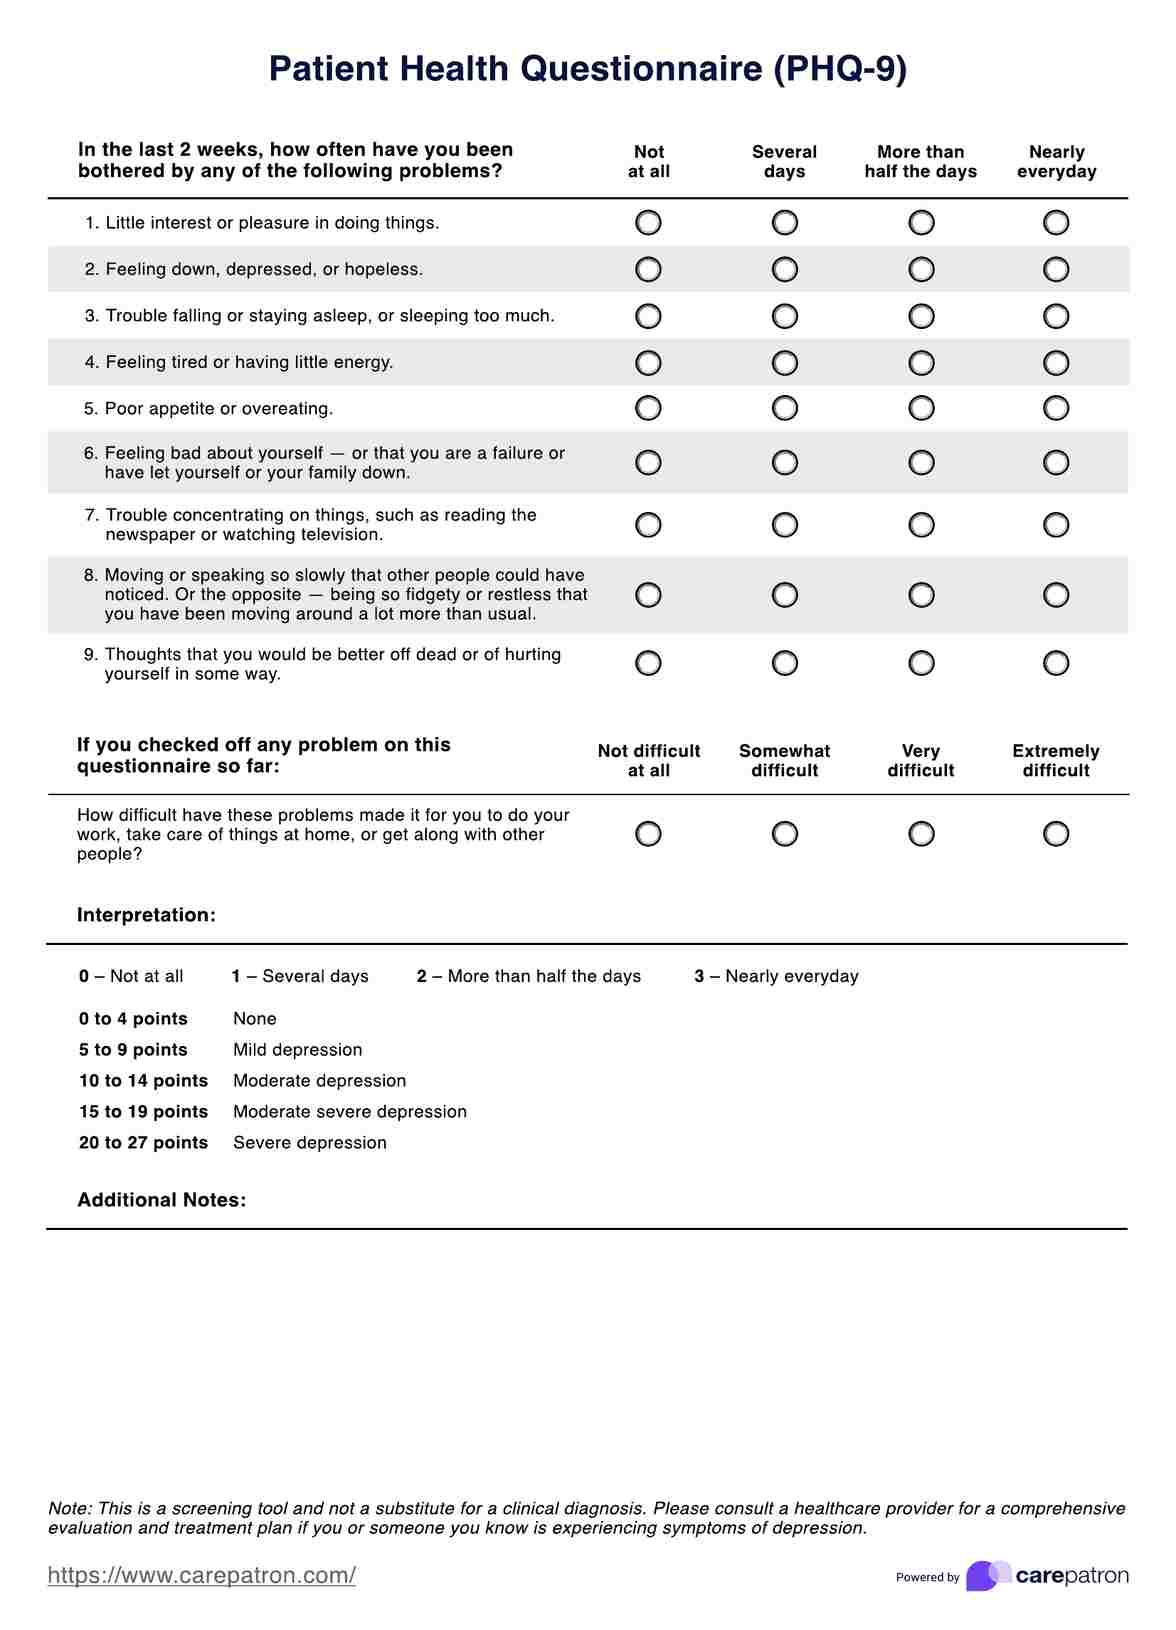 Patient Health Questionnaire (PHQ-9) PDF Example